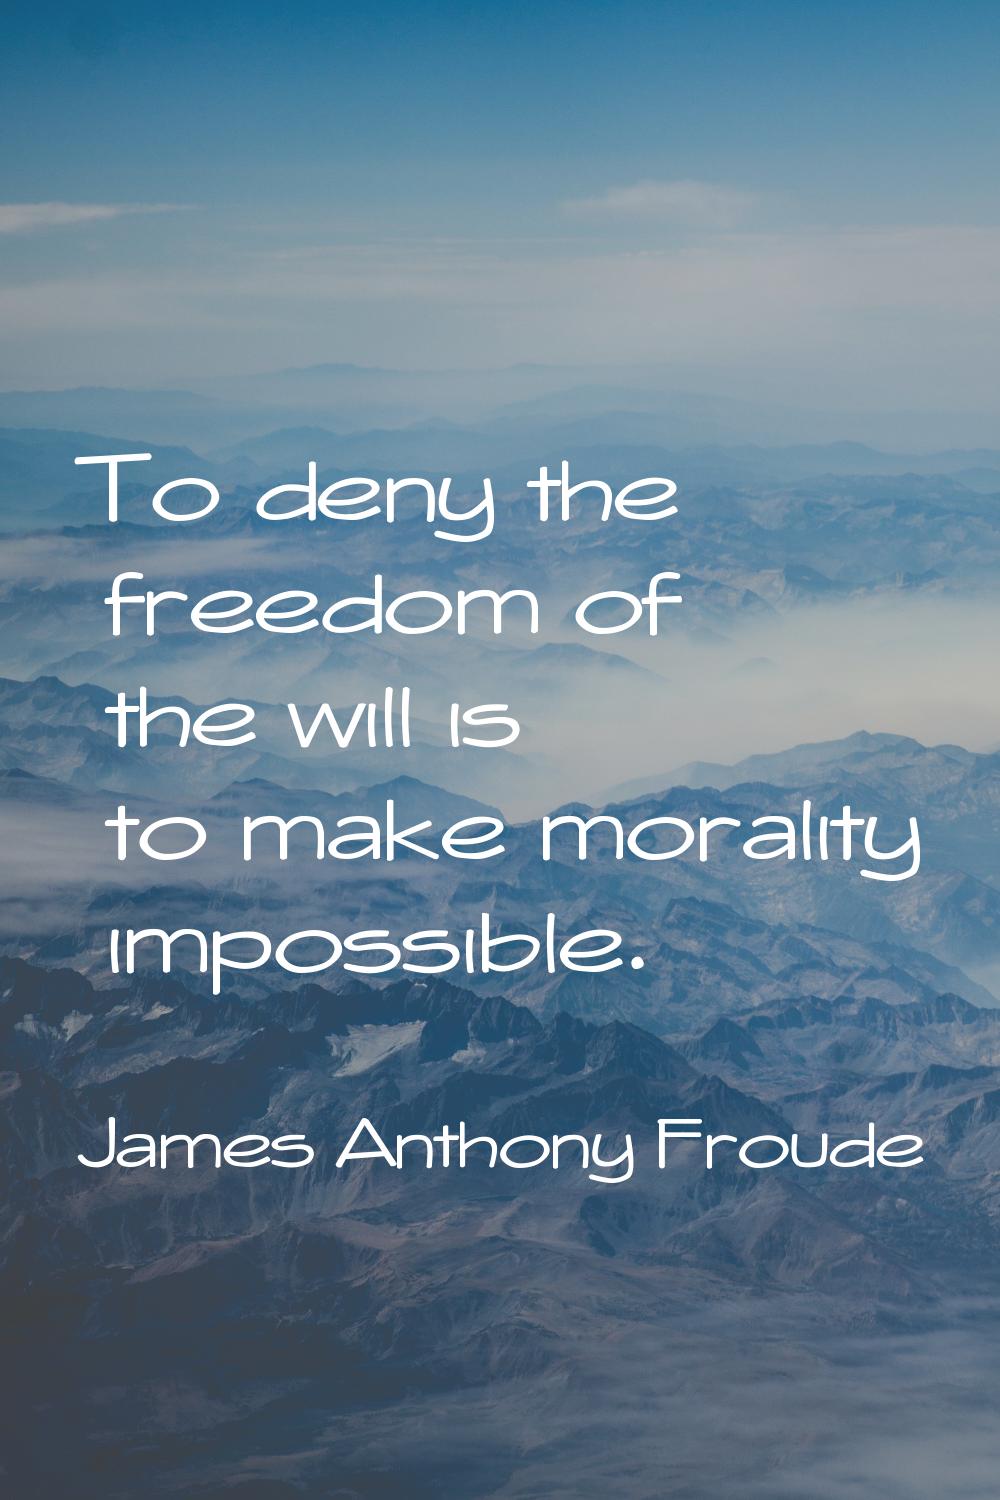 To deny the freedom of the will is to make morality impossible.